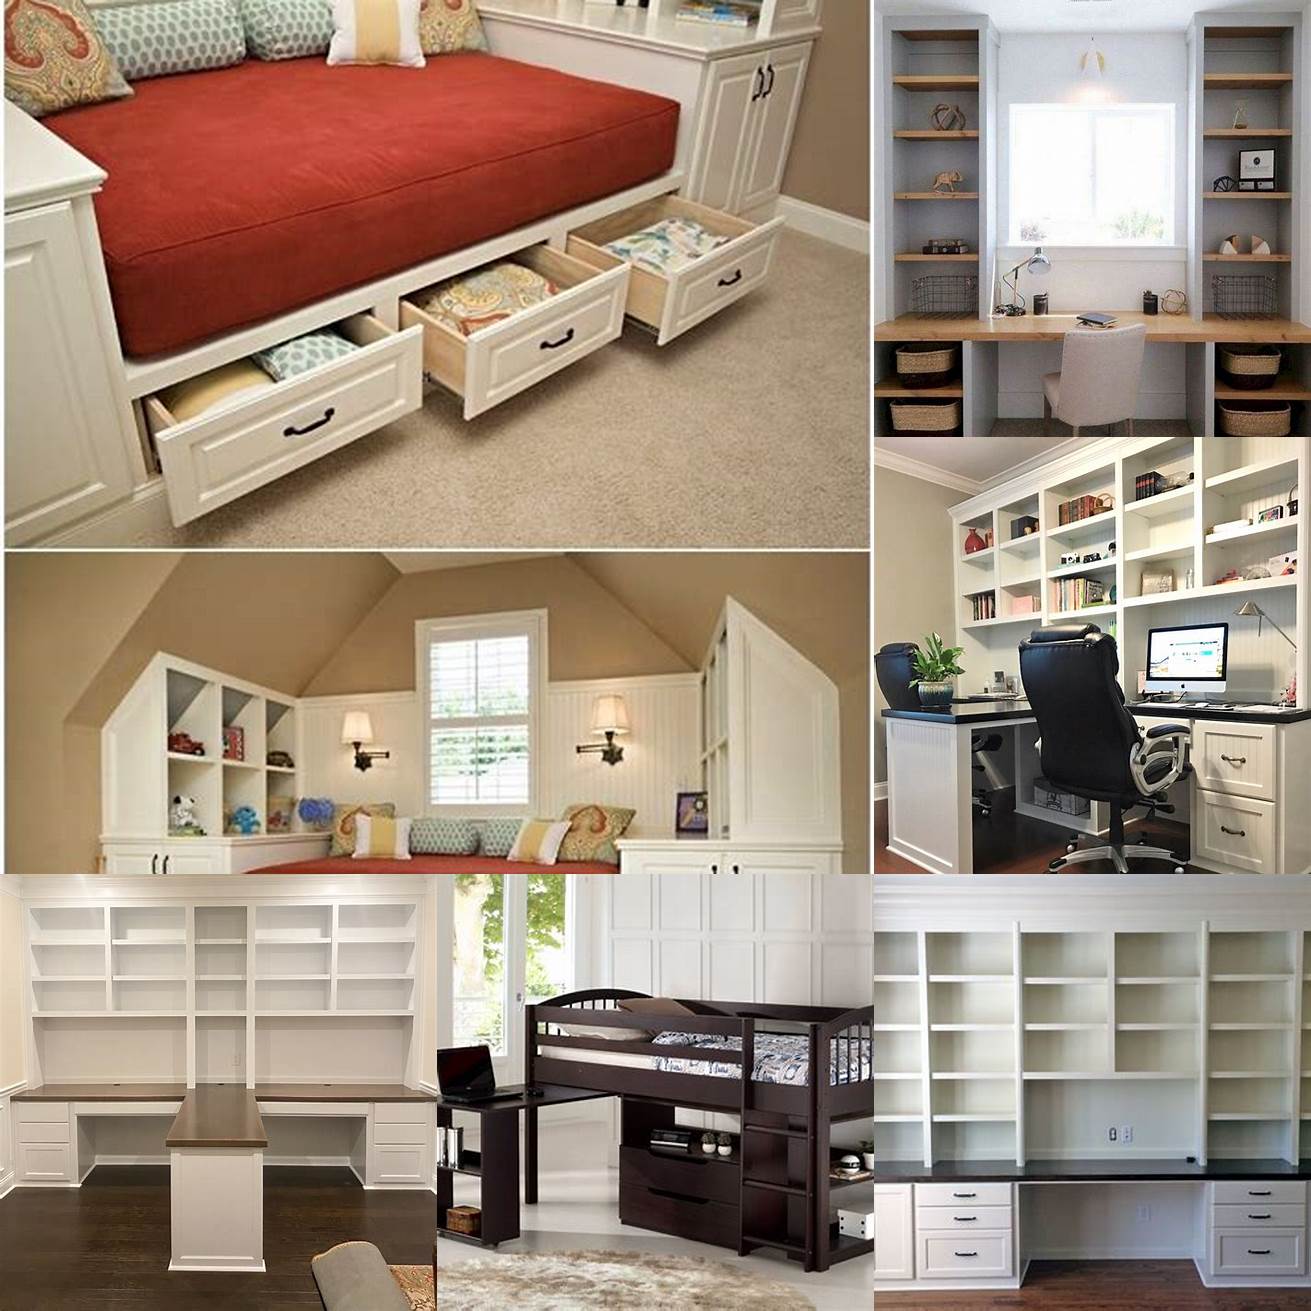 Organized Some Desk Beds come with built-in storage such as drawers or shelves to help you keep your workspace organized